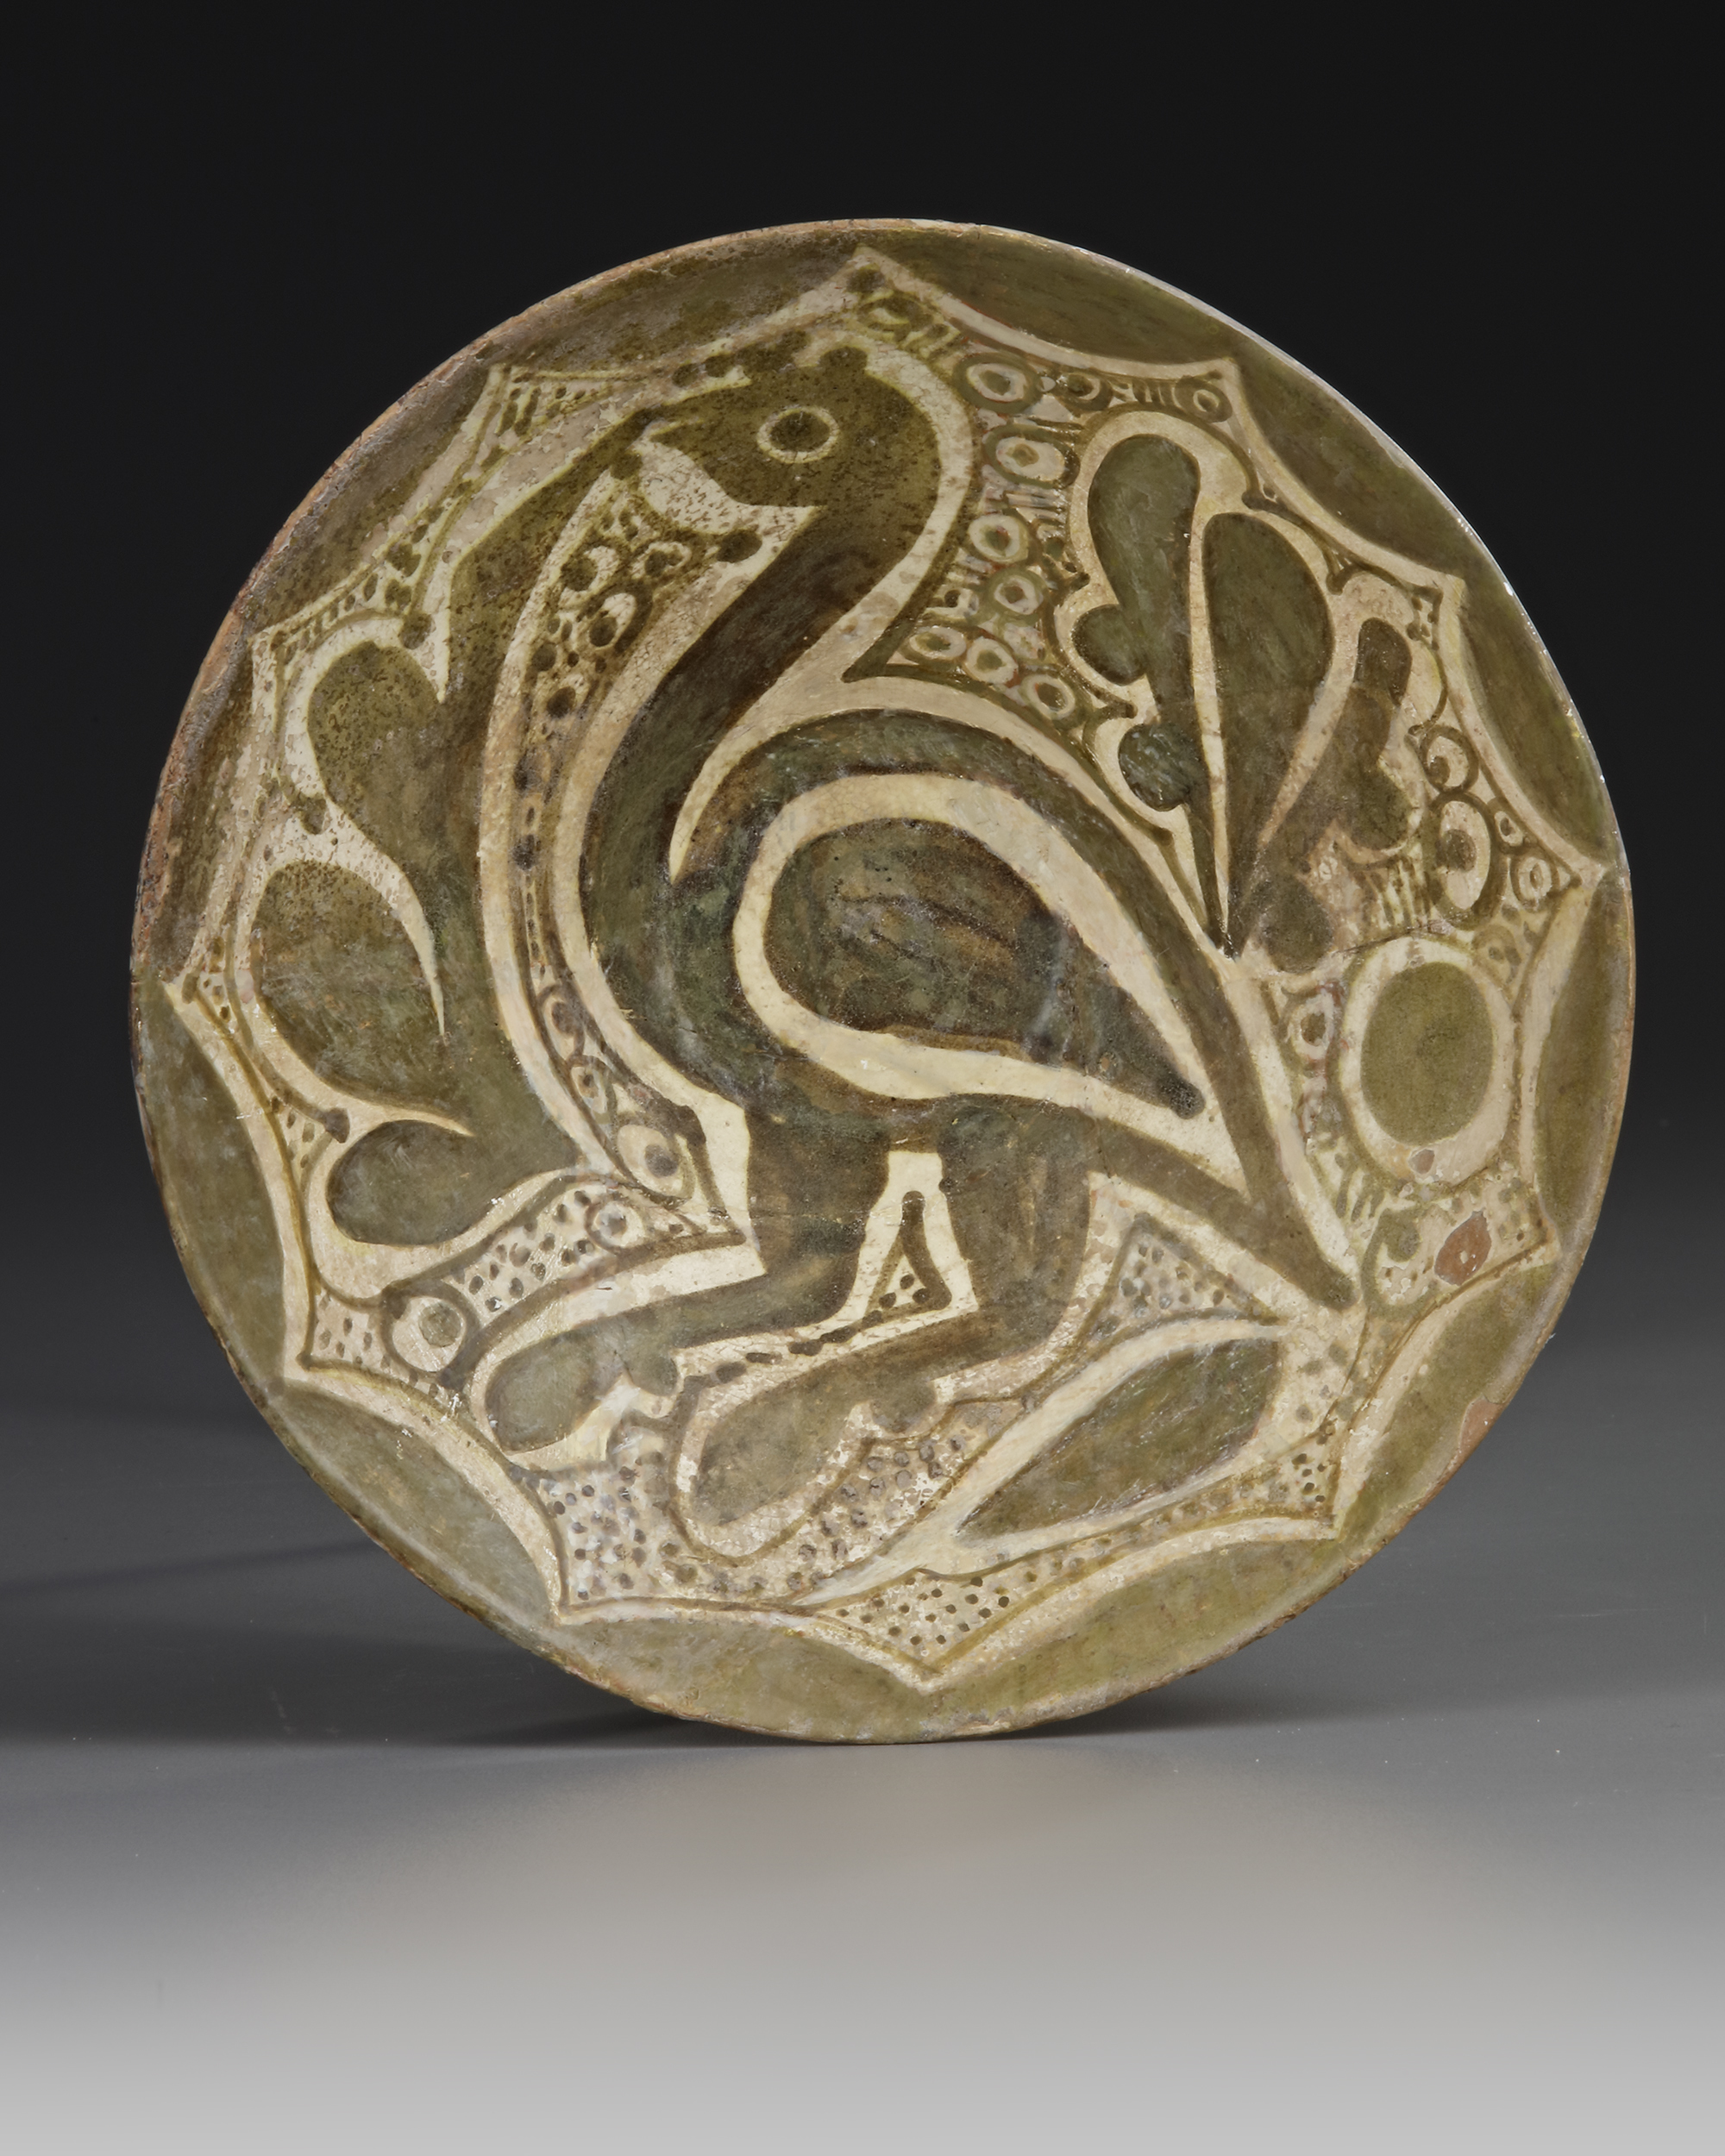 A NISHAPUR POTTERY BOWL, PERSIA, 10TH CENTURY - Image 2 of 10